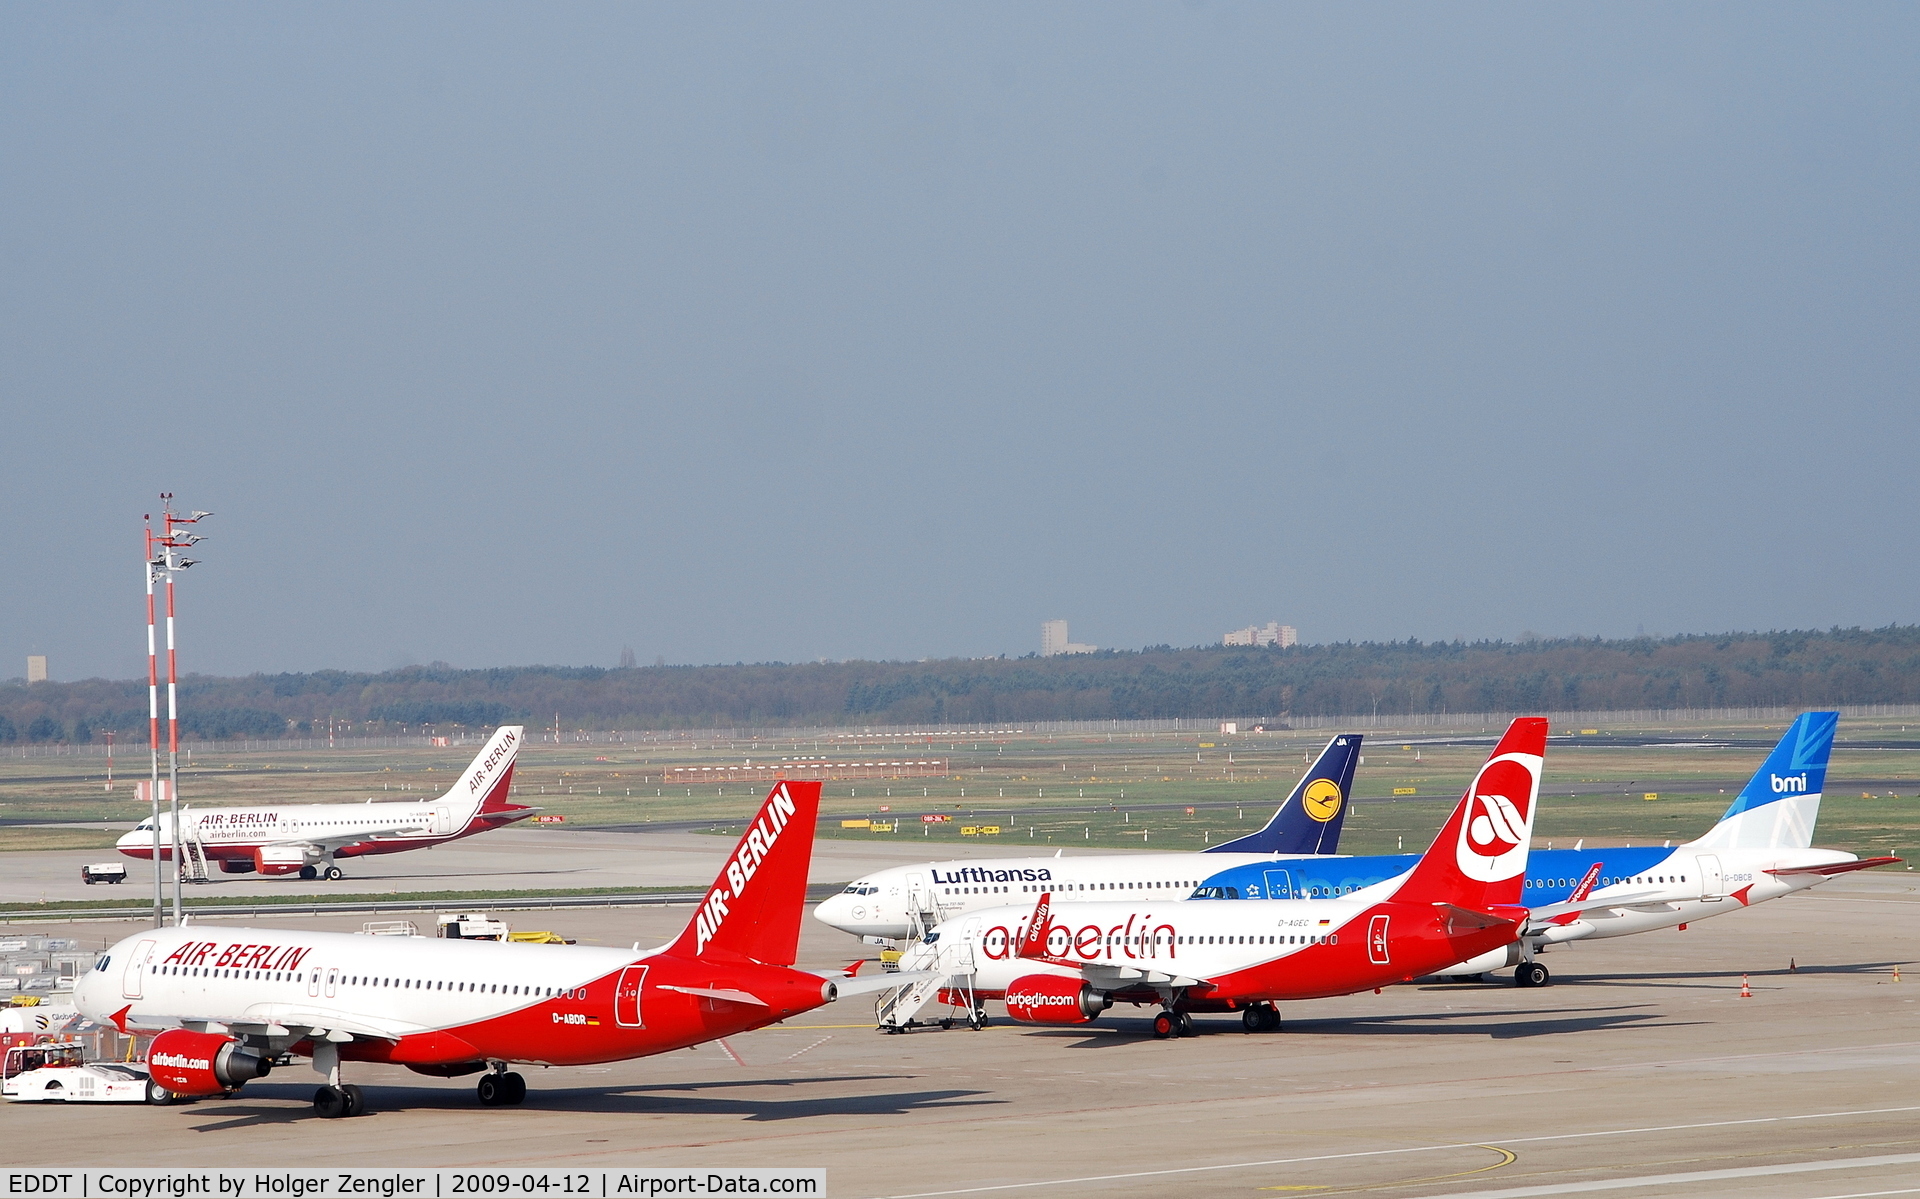 Tegel International Airport (closing in 2011), Berlin Germany (EDDT) - Refreshing colours in the southern parts of TXL